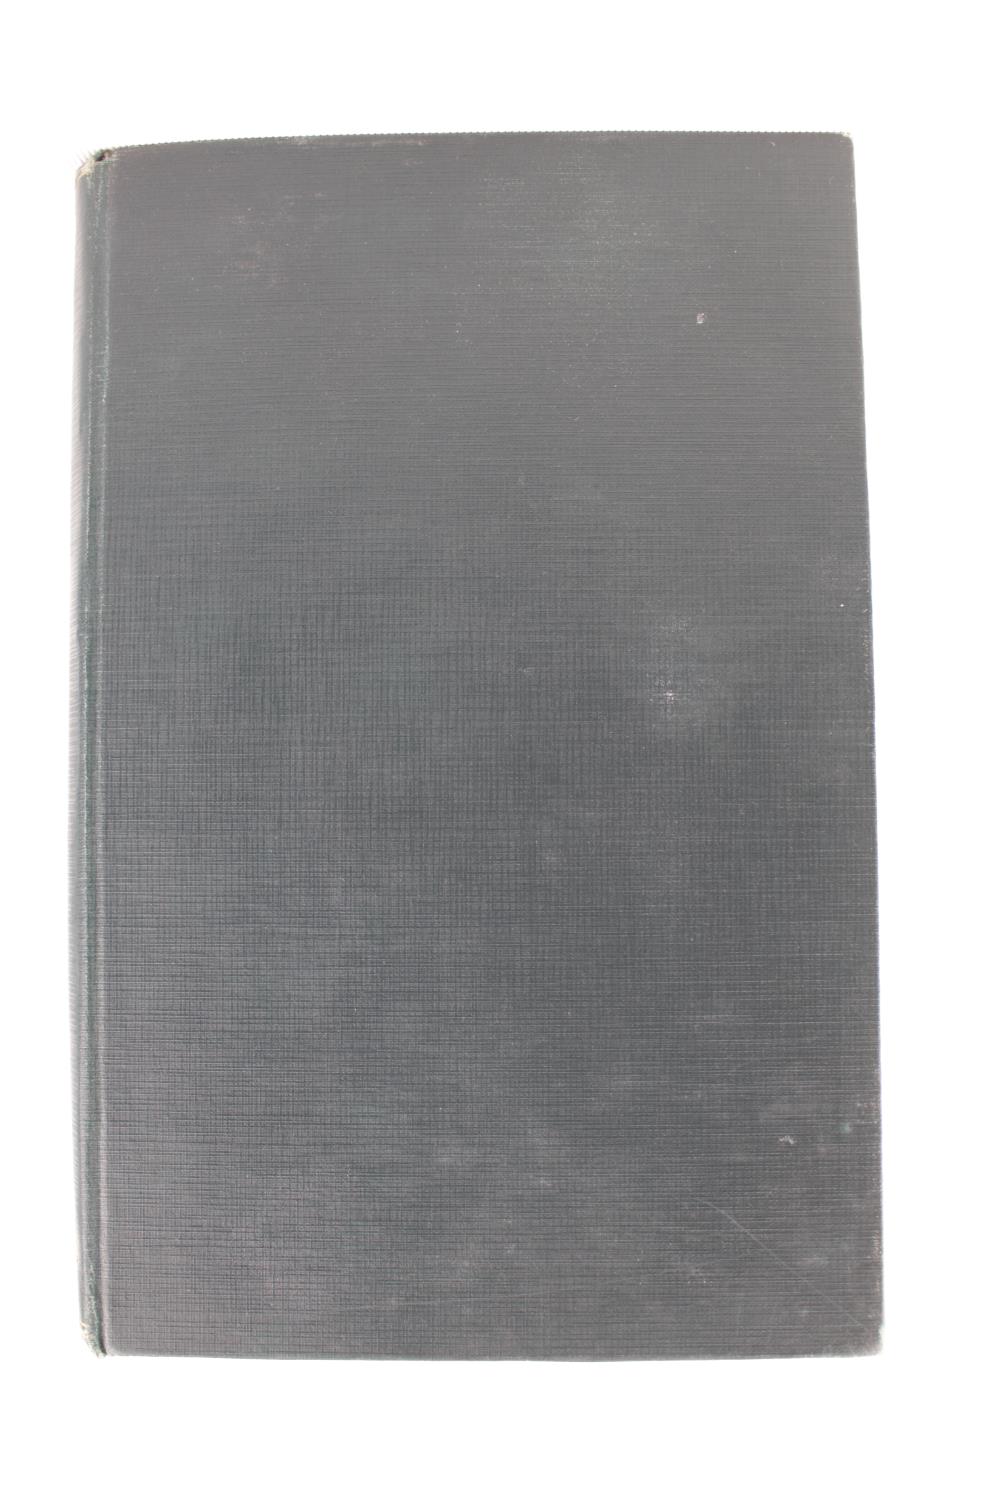 Moonchild by Aleister Crowley.First edition. Mandrake Press, London 1929. A lovely first edition - Image 3 of 4